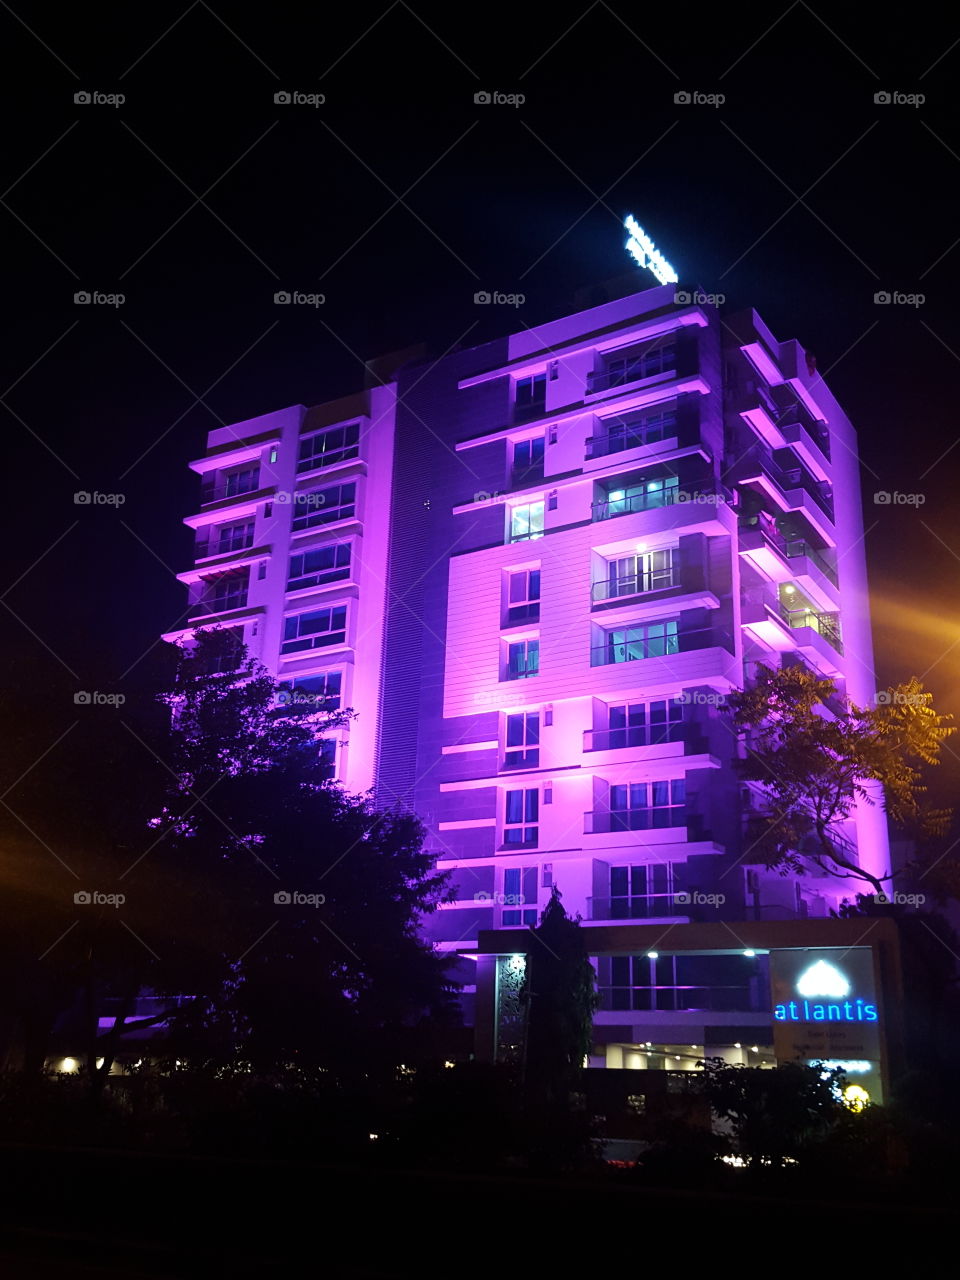 Building illuminated with pink lights at night